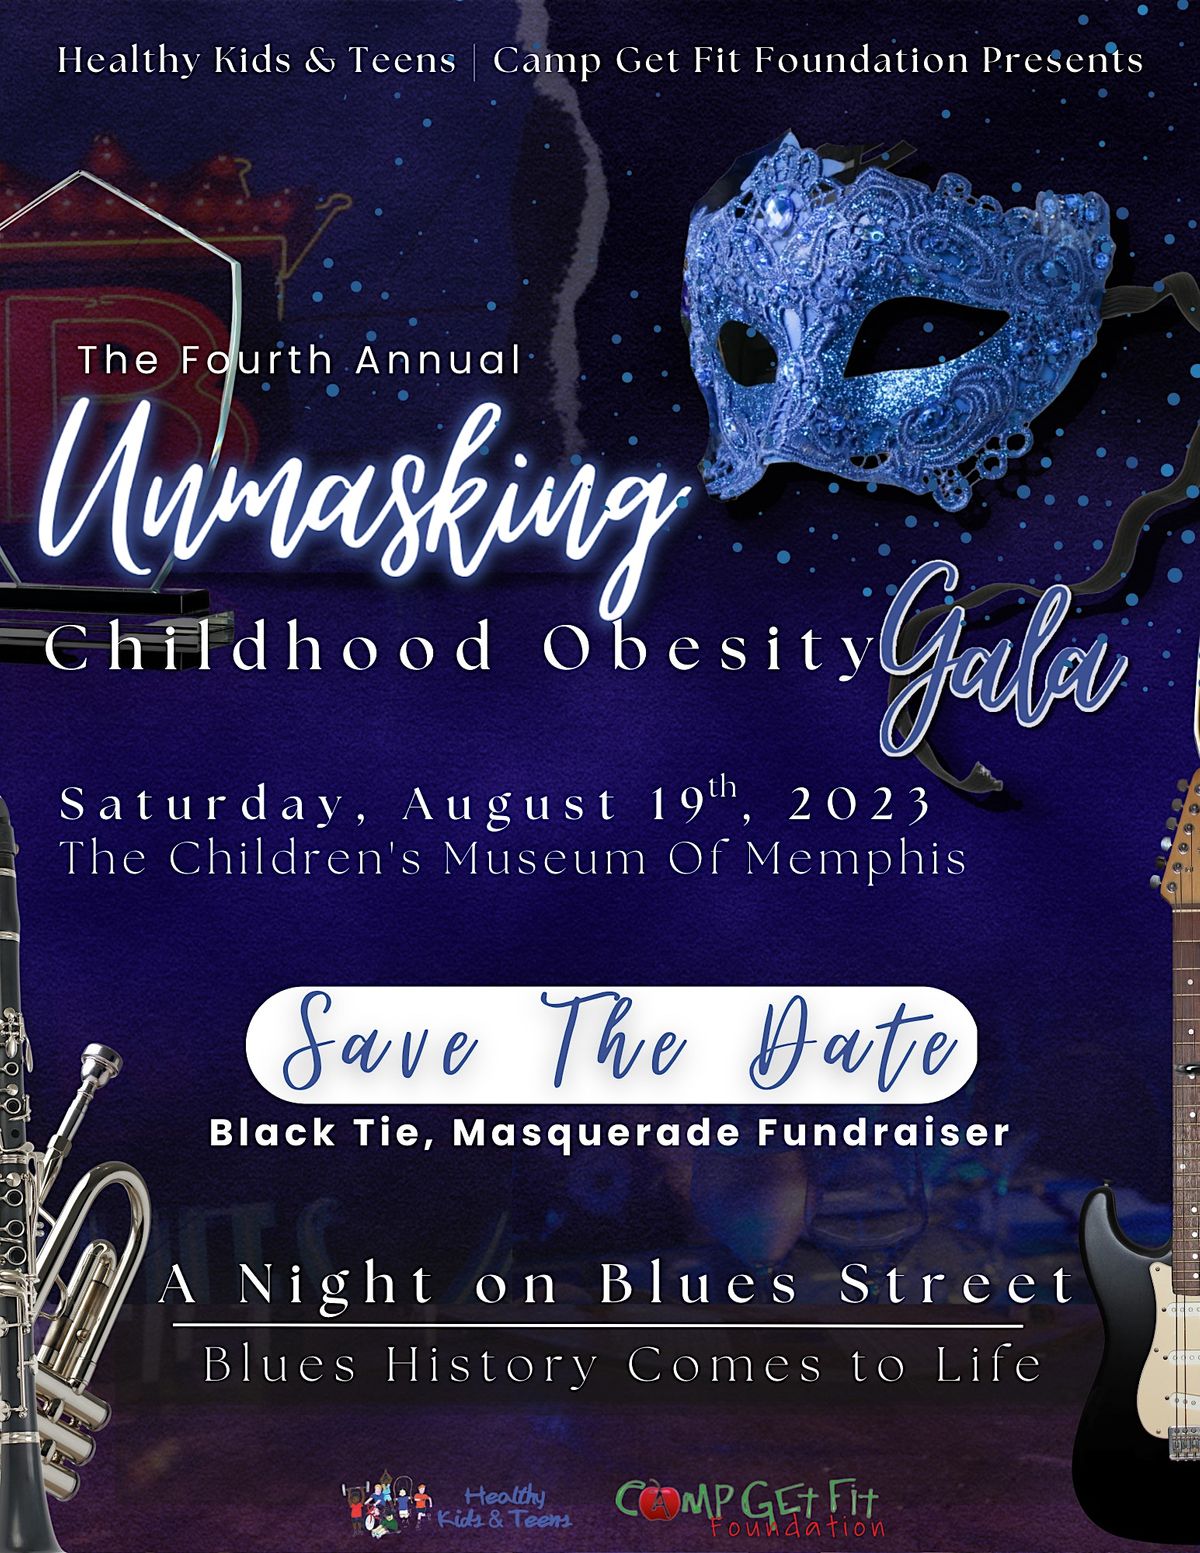 The 4th Annual Unmasking Childhood Obesity Gala